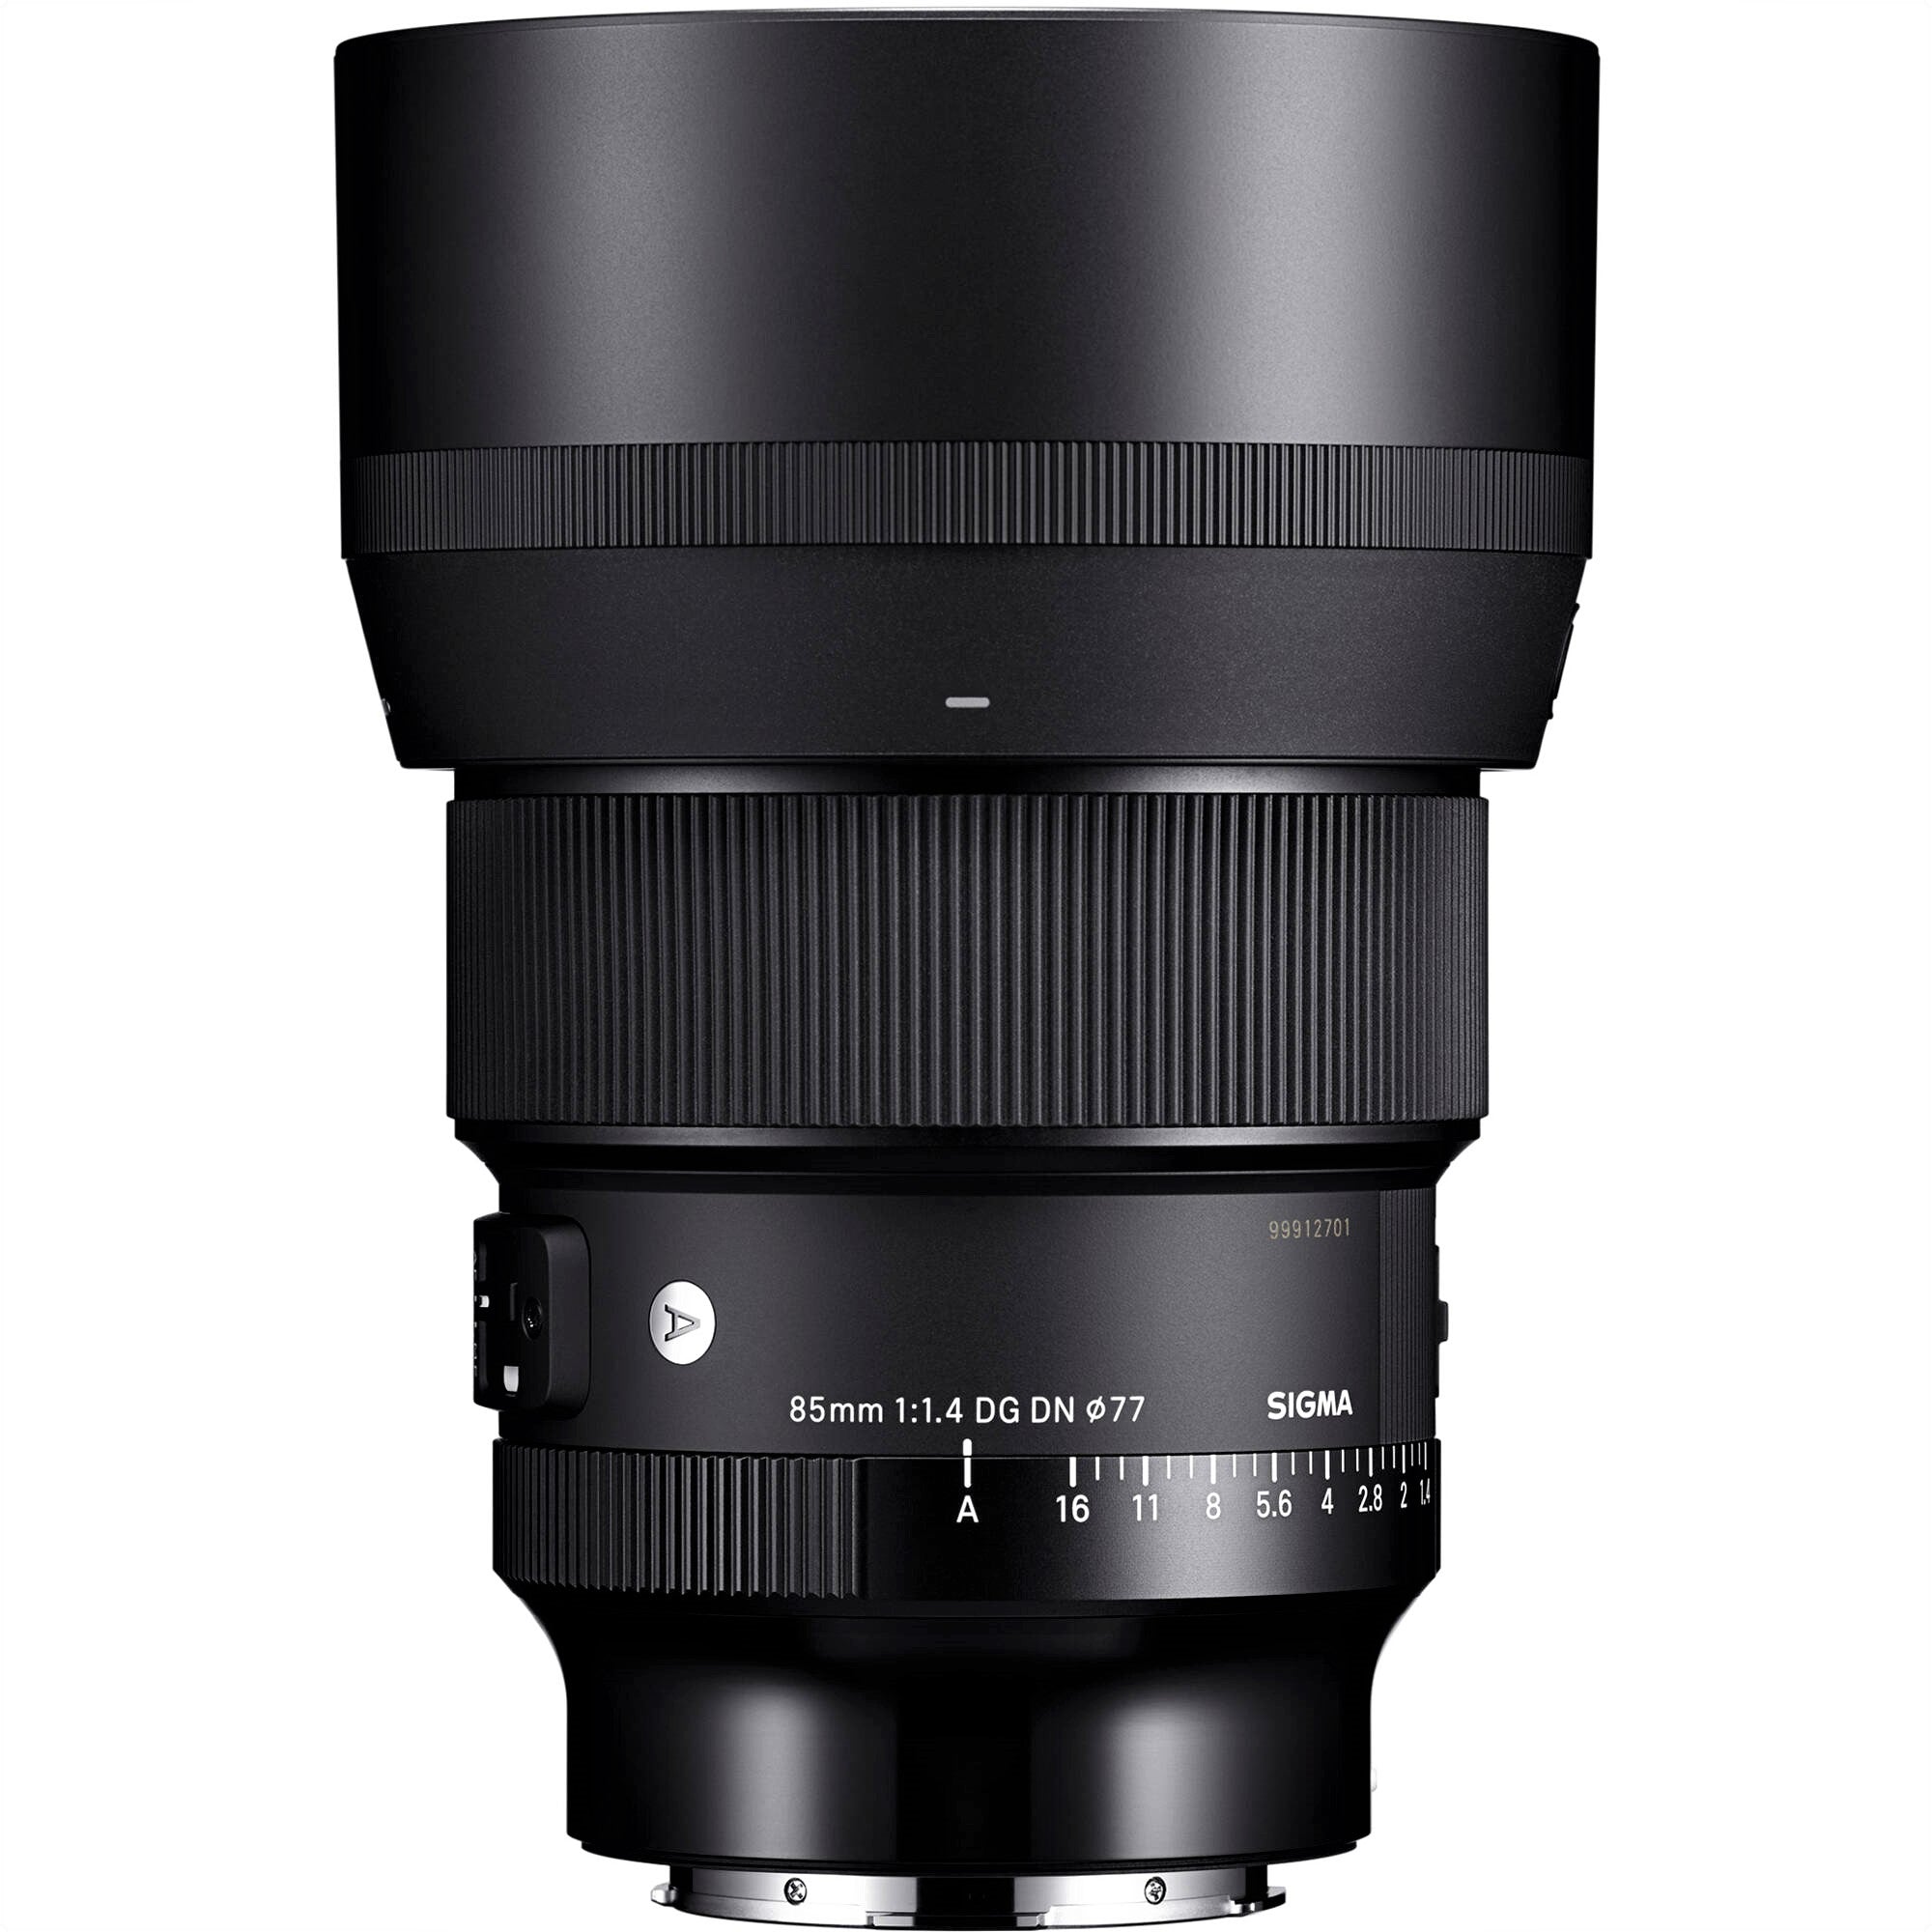 Sigma 85mm F1.4 DG DN Art Lens for Leica L with Attached Lens Hood on the Top